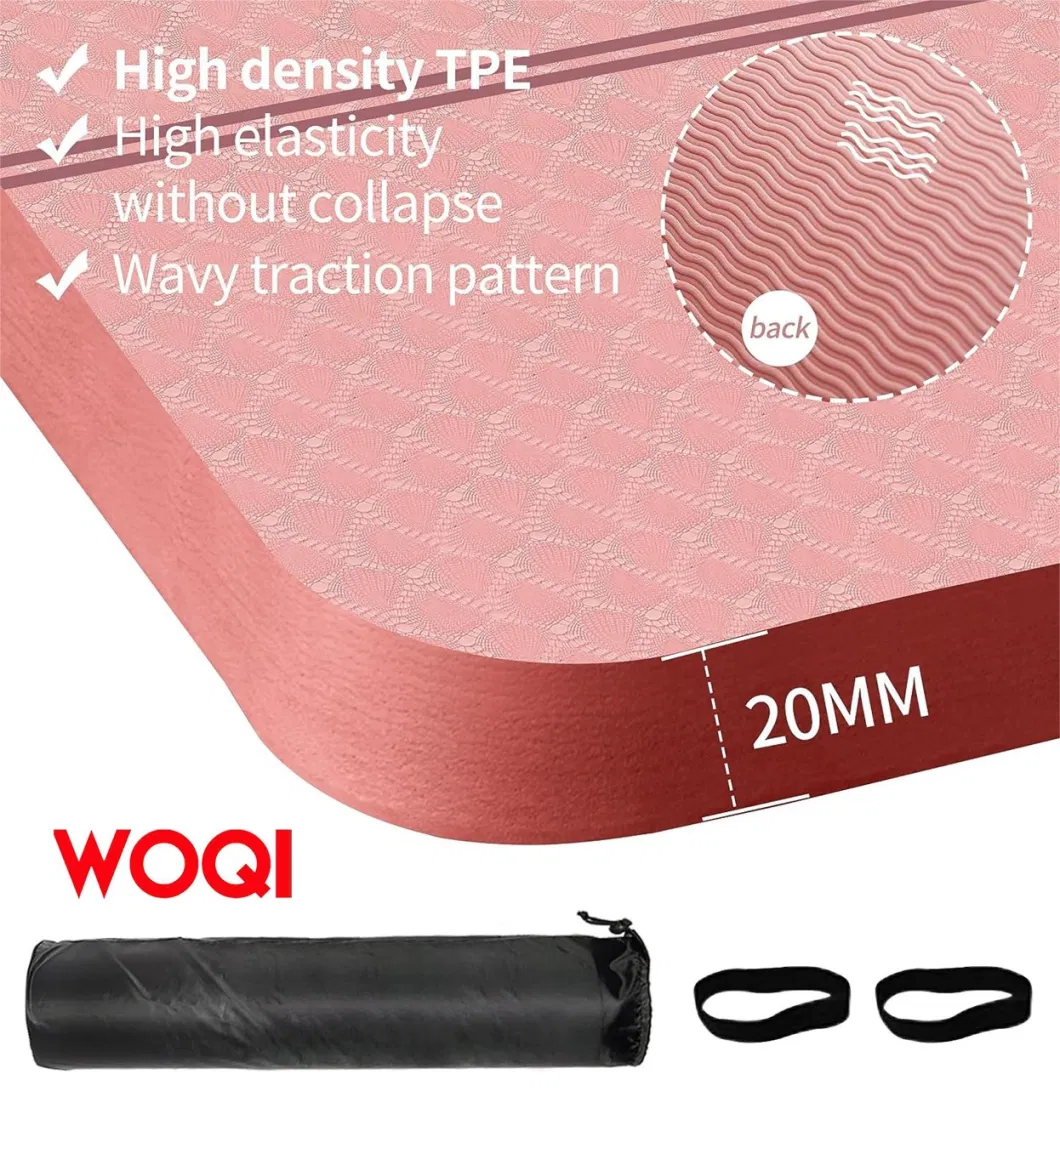 Woqi Large Sports Mat, Suitable for Fitness, Yoga, Pilates, Floor Exercise